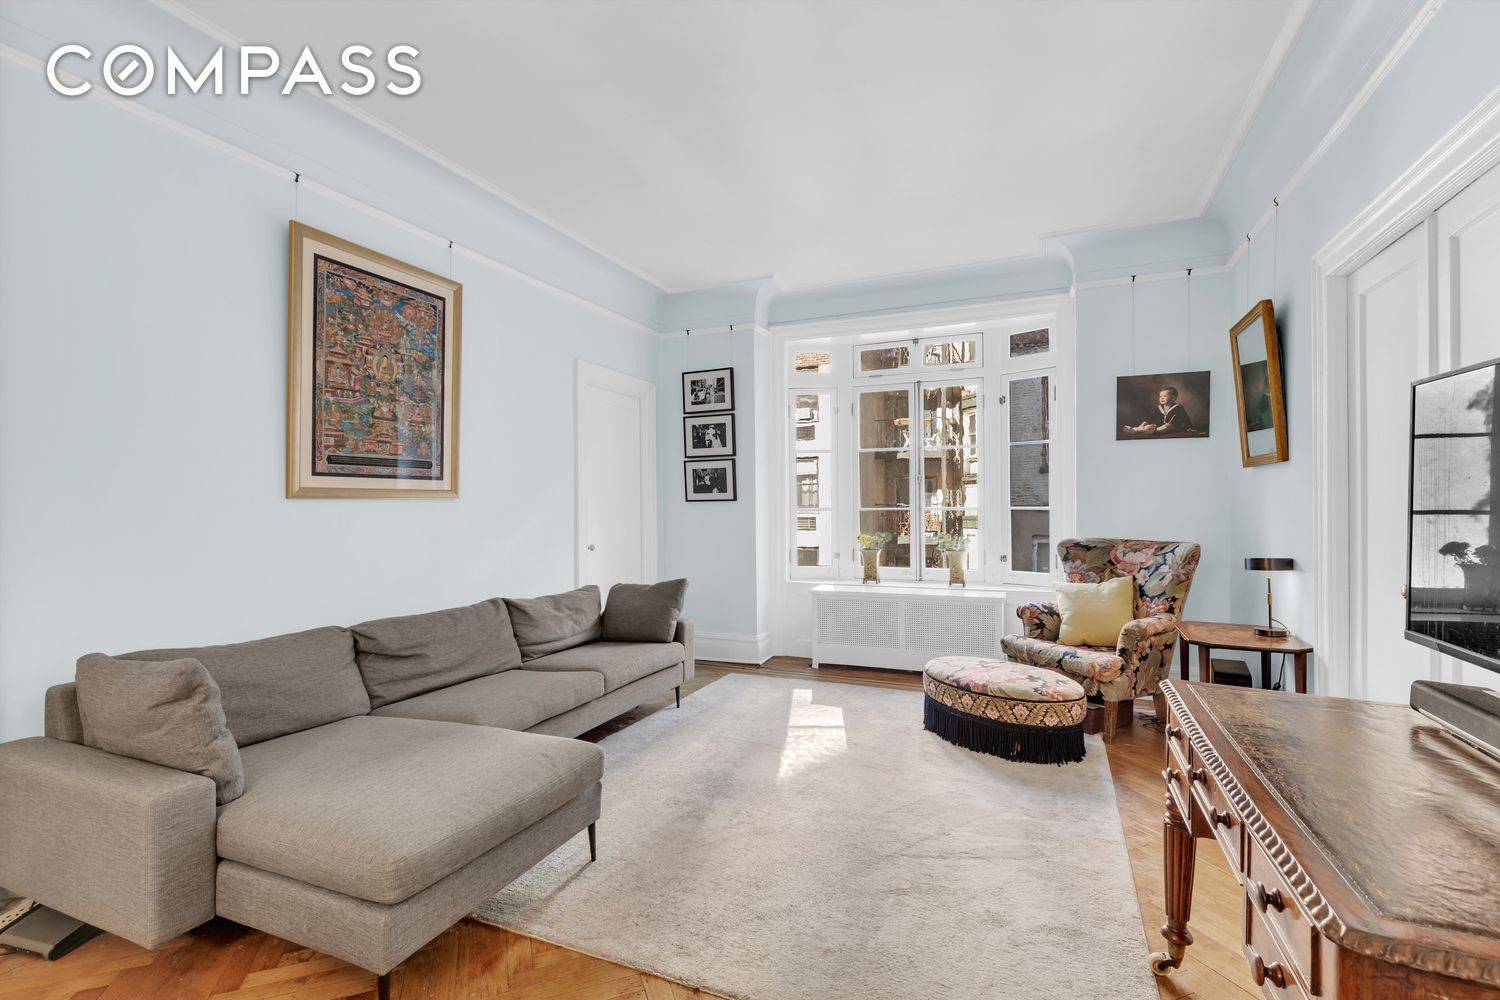 105 W. 72 St. 2C can be your cheerful home in the city, just three minutes from Central Park.